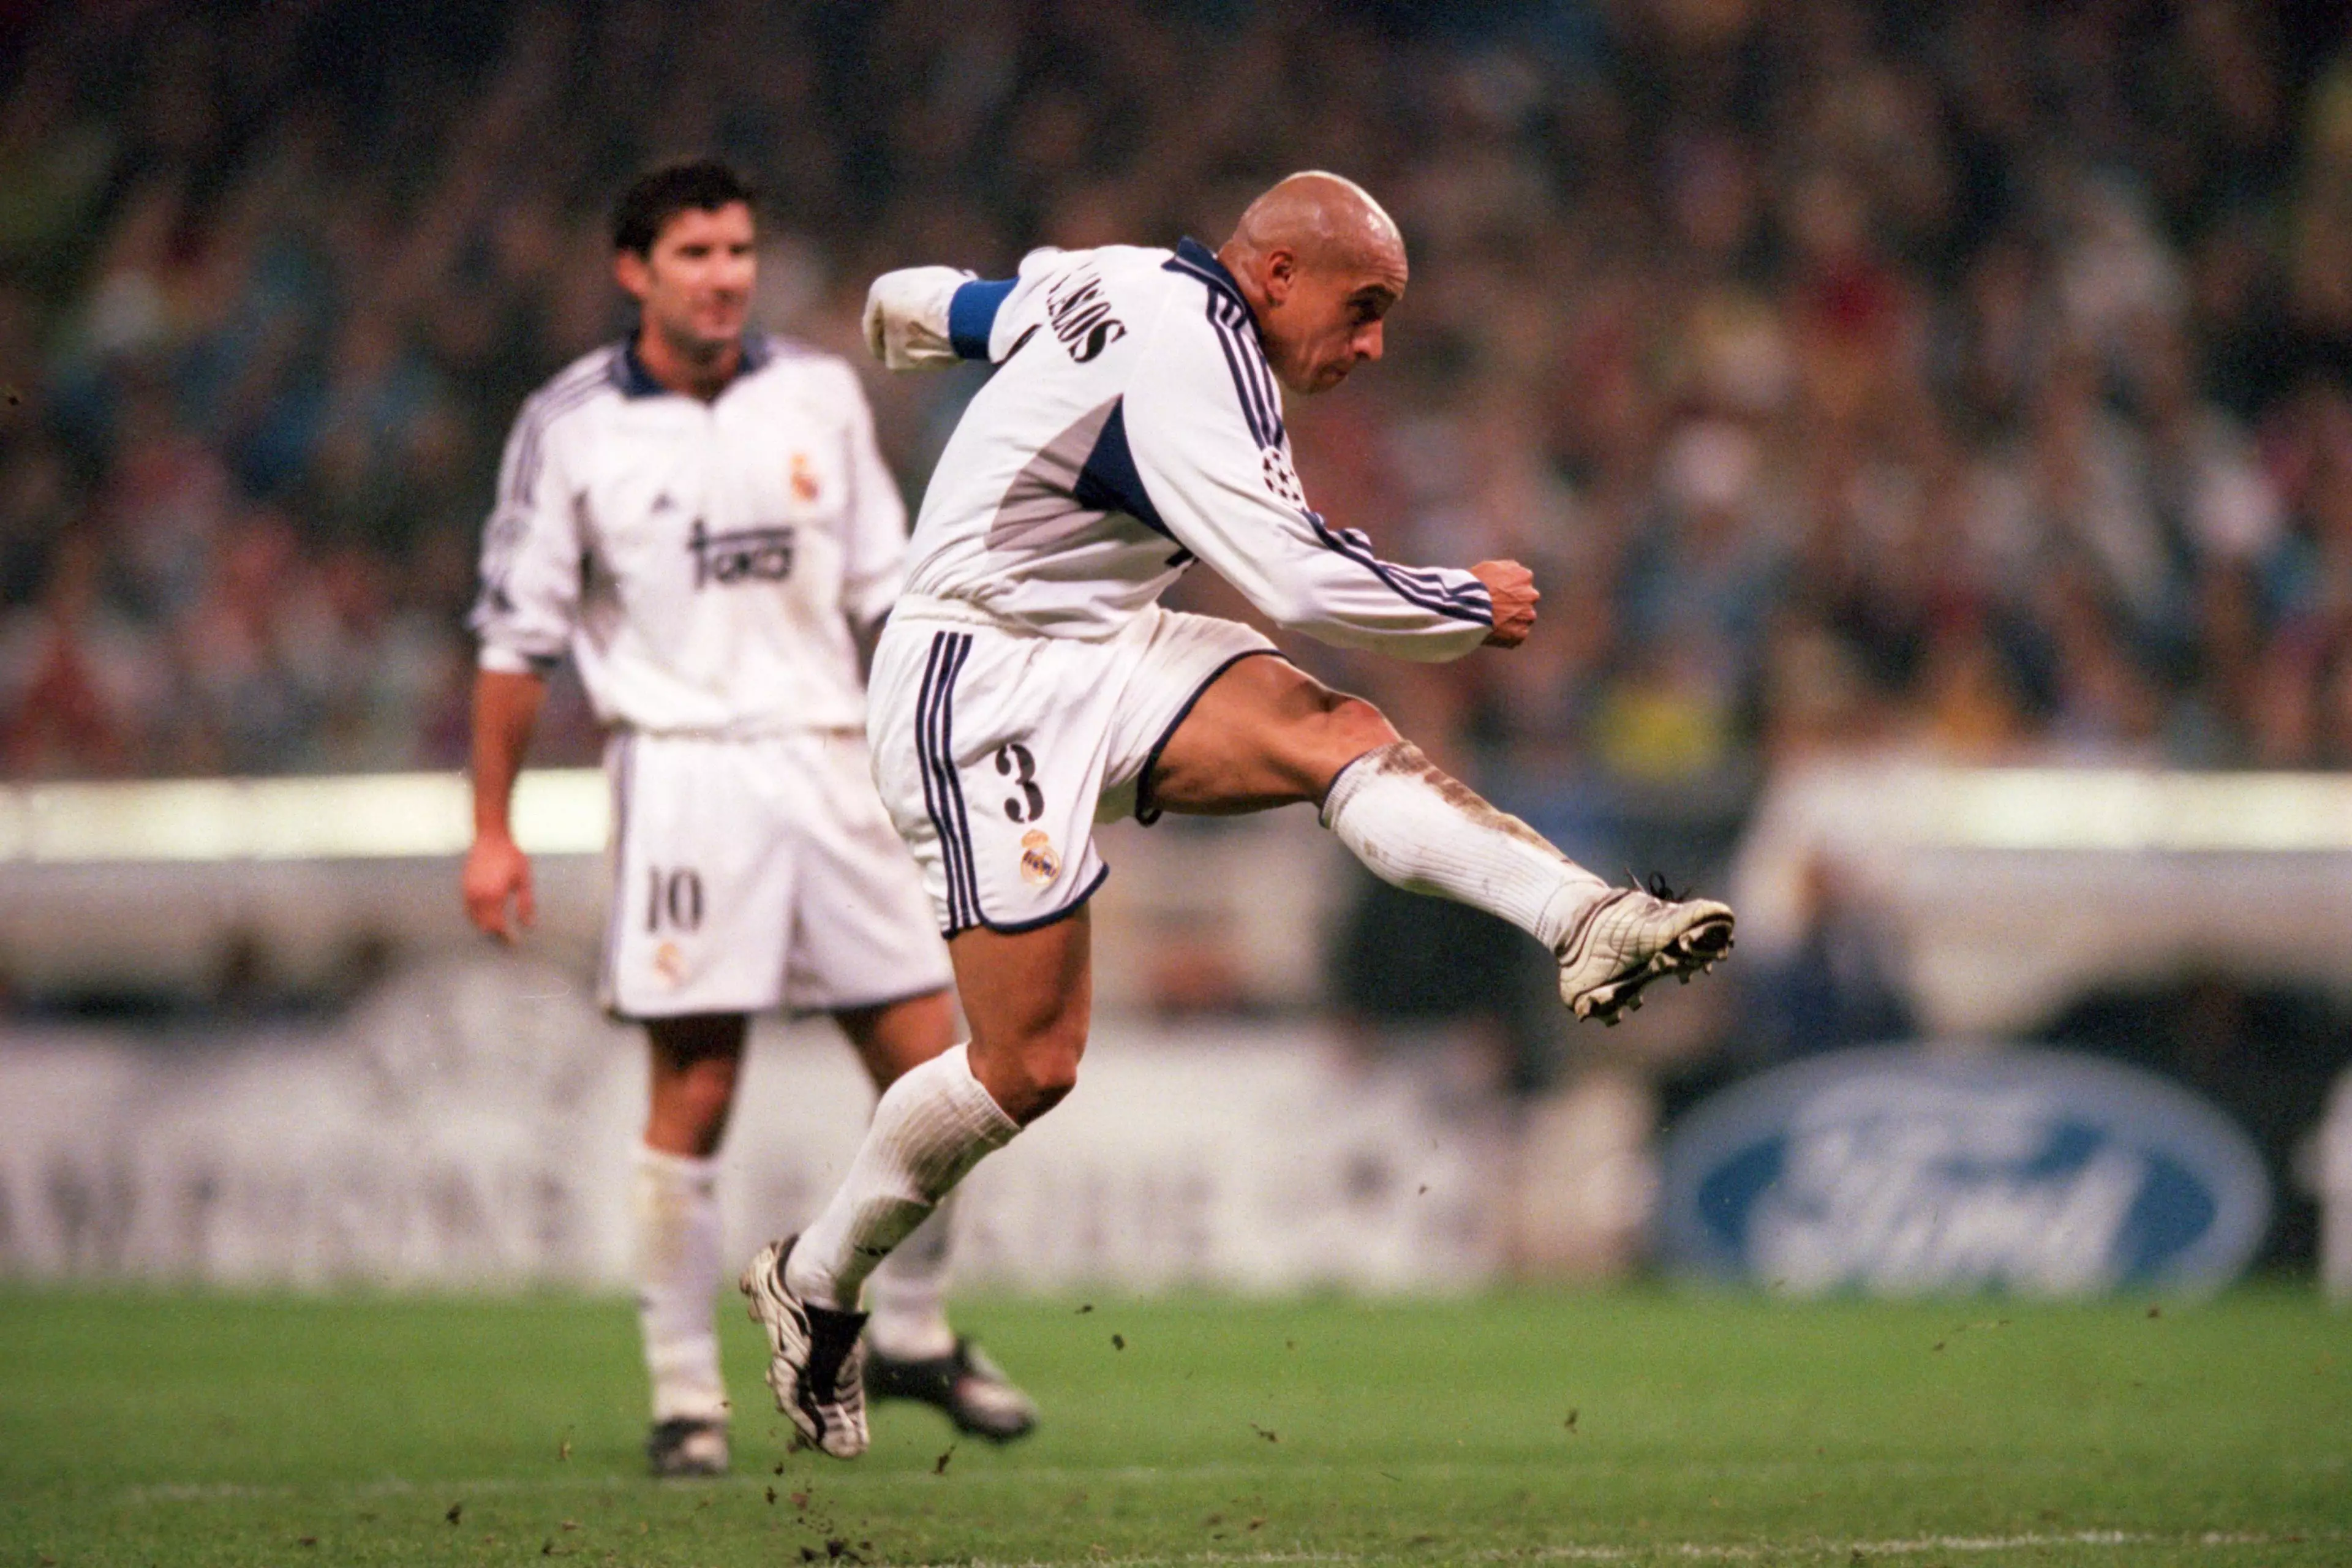 Roberto Carlos Names The Premier League Club He Almost Joined In 2007